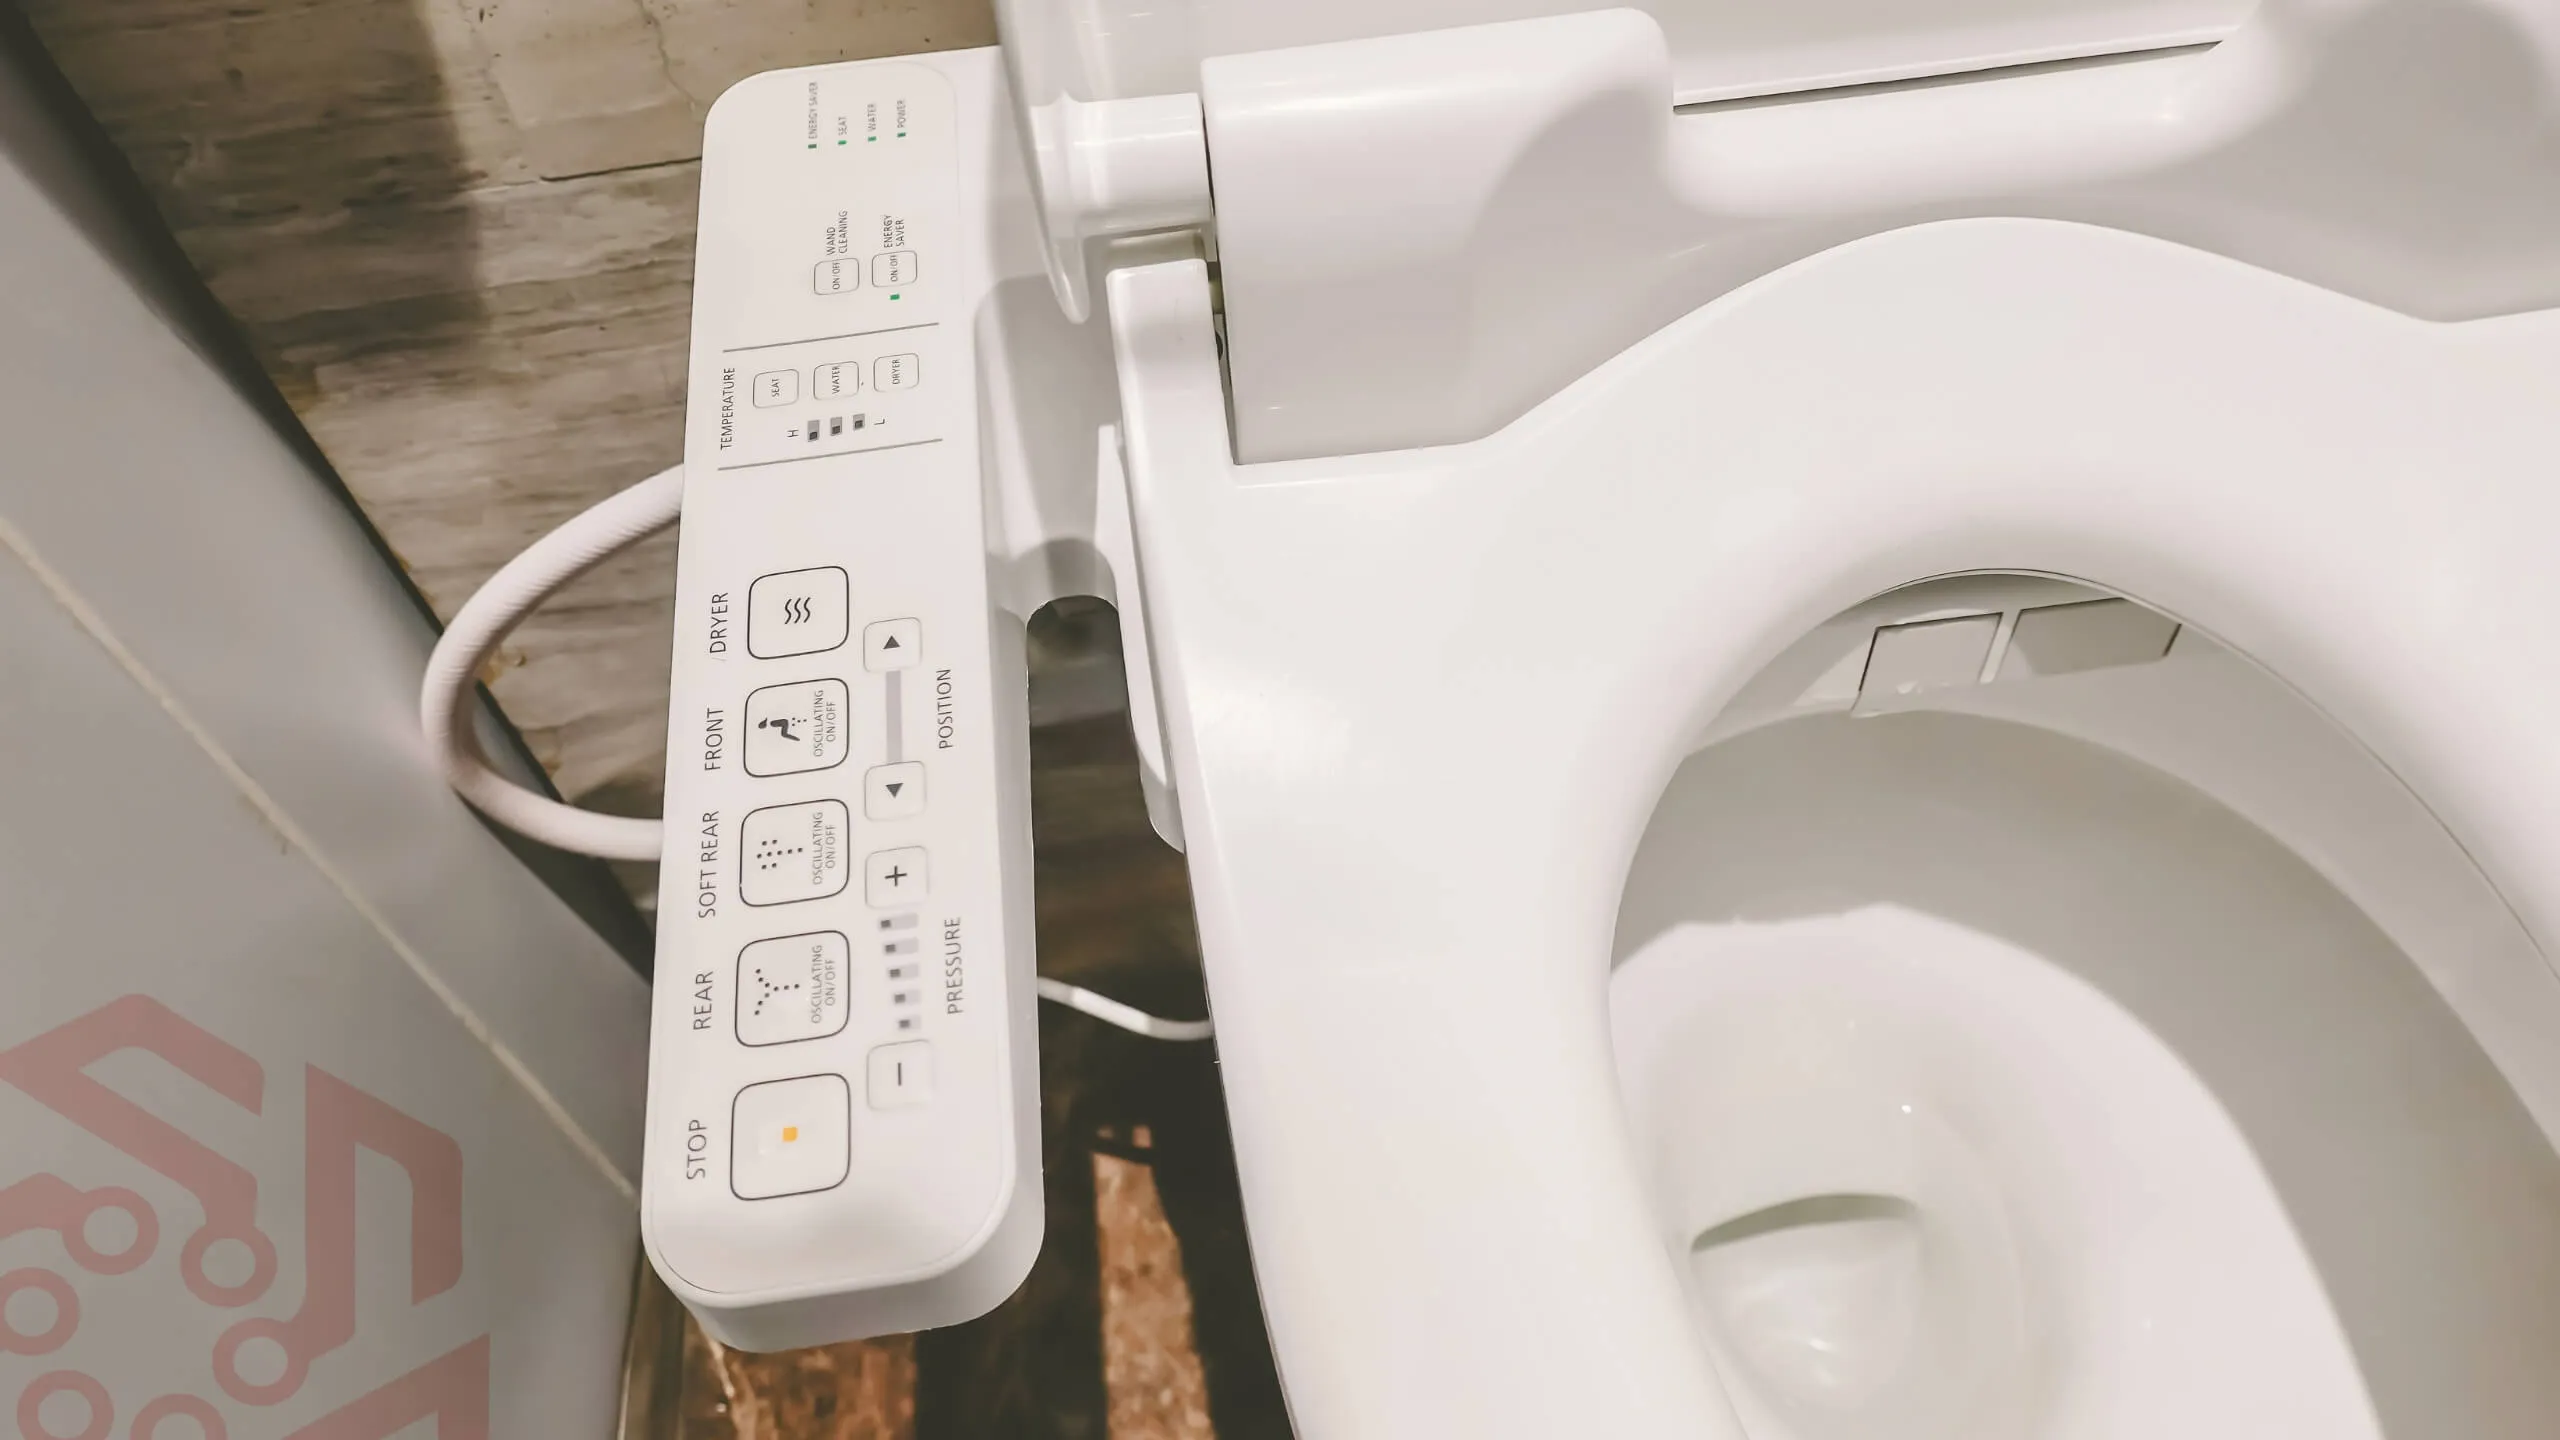 Example of smart toilet with control on the seat